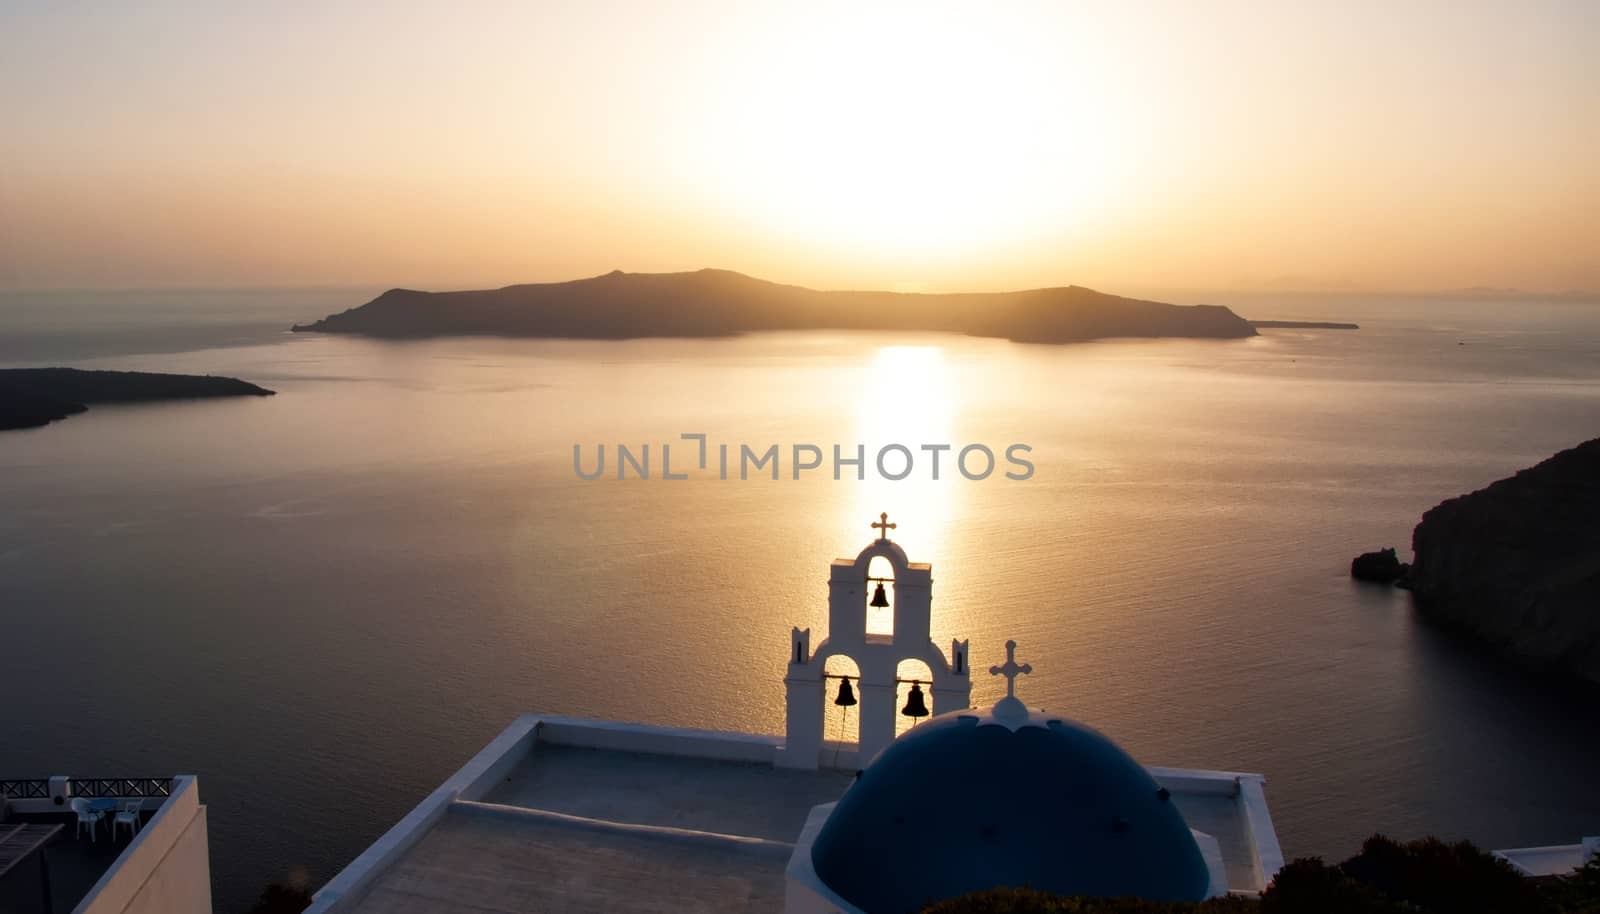 One of the most popular attractions in Oia is sunset viewing, a special event every evening. At this time the town is crowded with people.